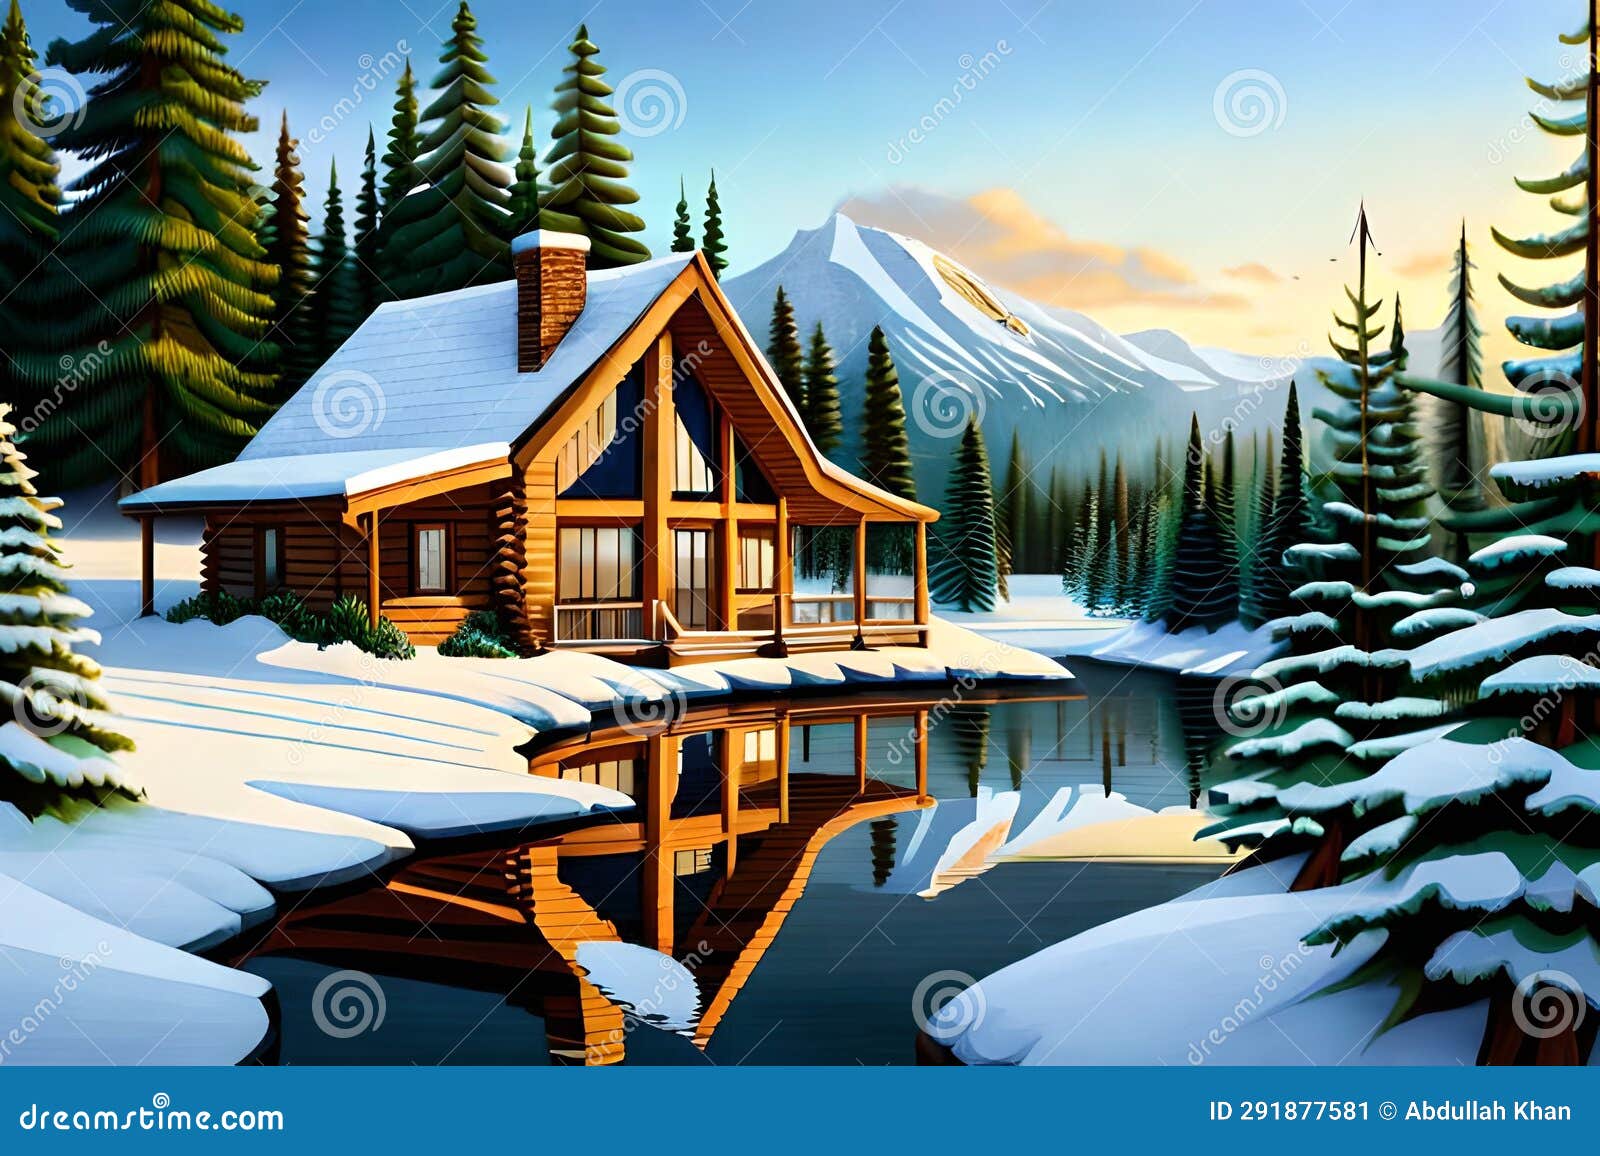 A Rustic Log Cabin Nestled in a Snowy Pine Stock Illustration ...